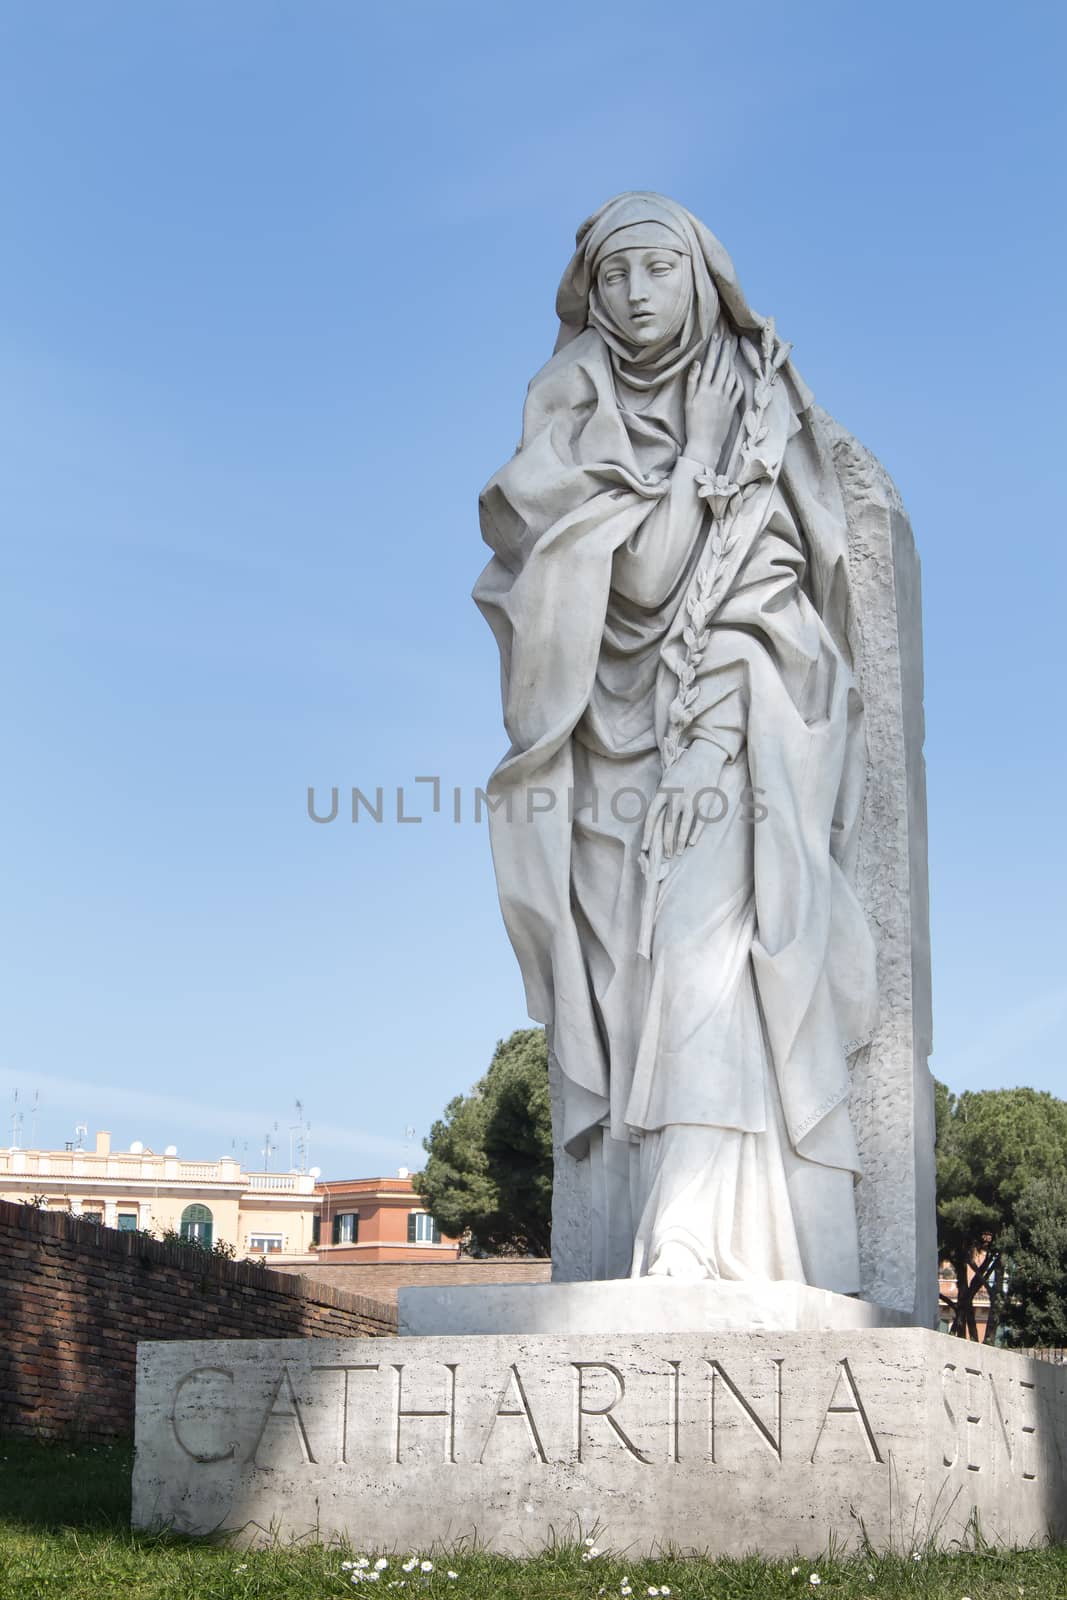 Statue of Catharina in italian Rome. Buildings in the background. Light blue sky.